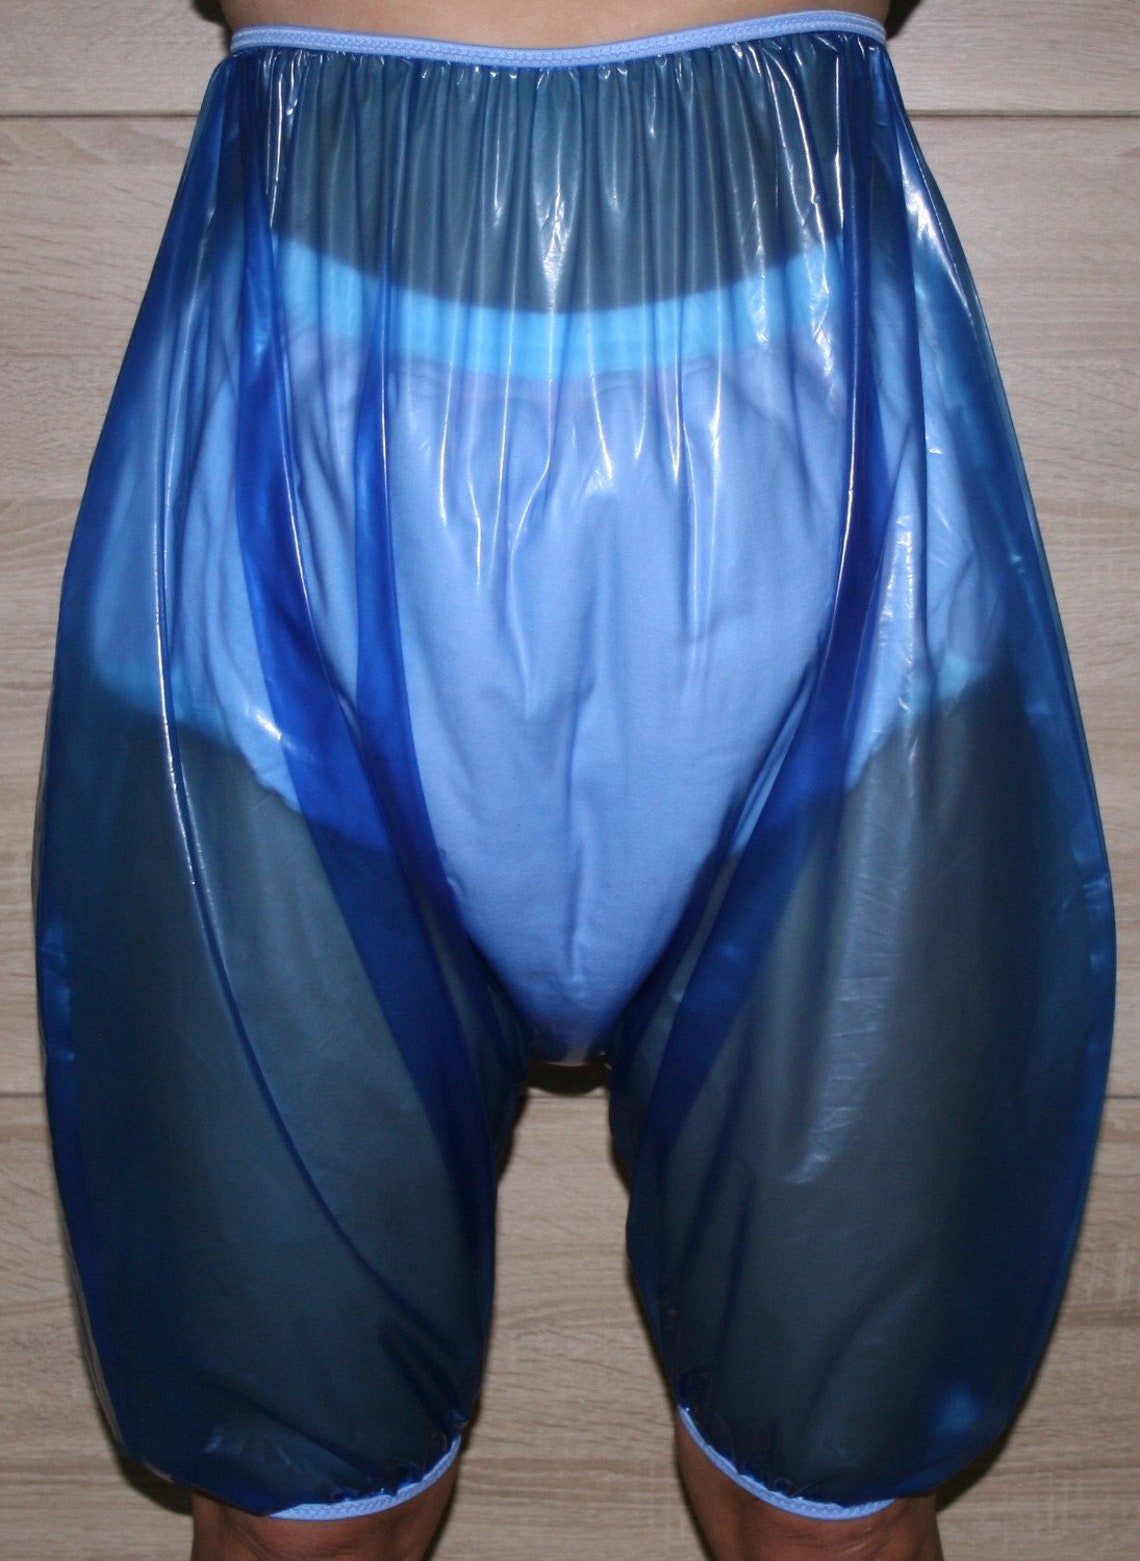 Knee-length Rubber PVC Adult Baby Euroflex Incontinence Diaper - Etsy